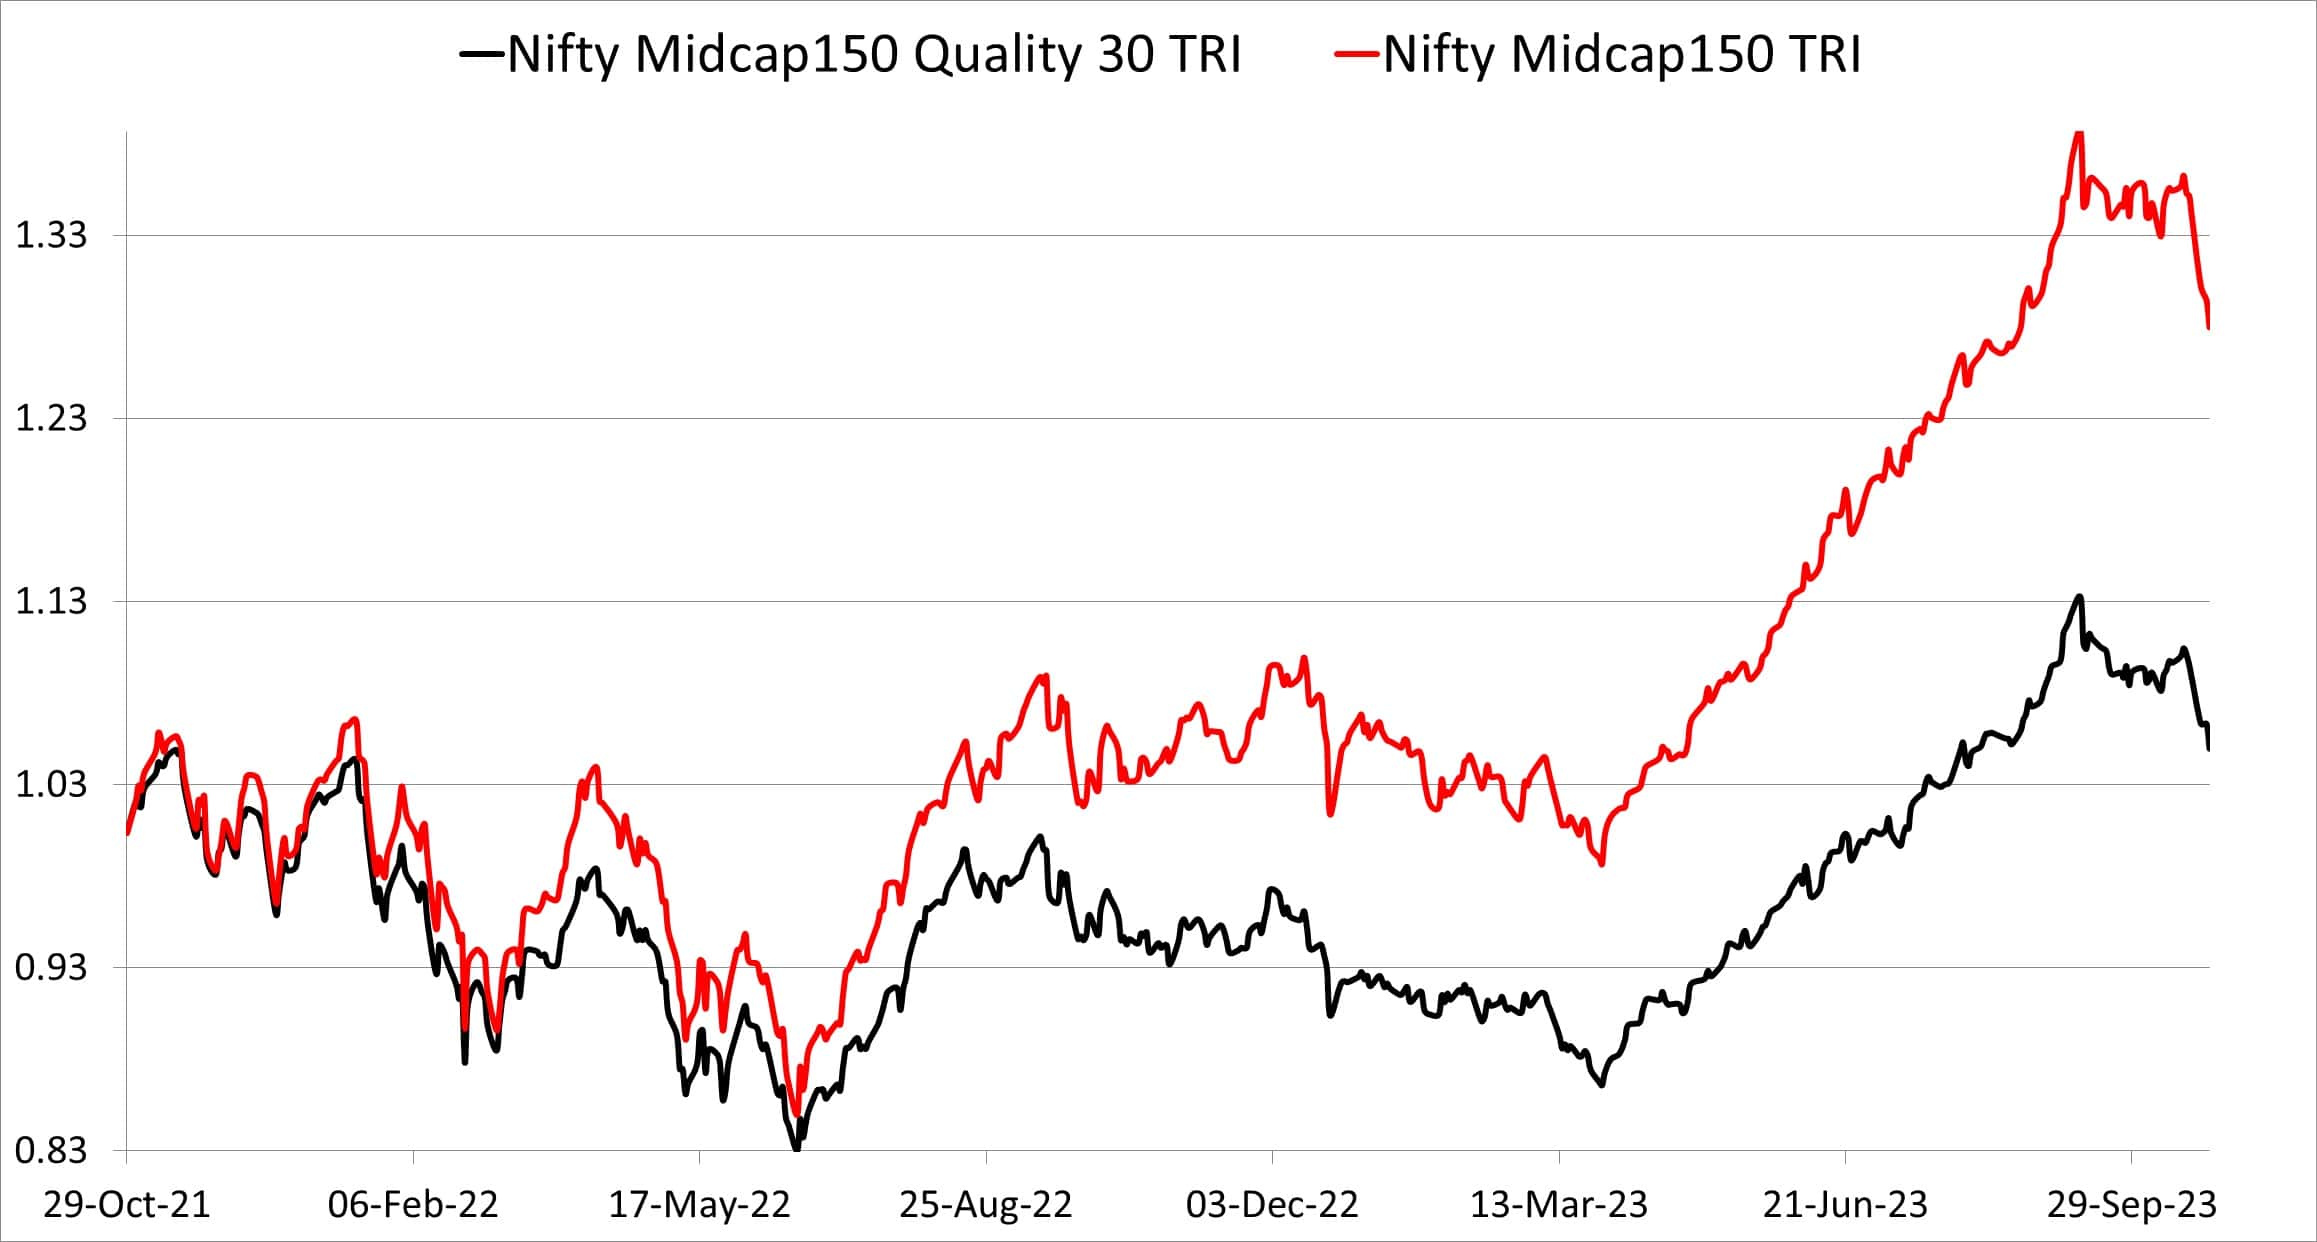 Performance of Nifty Midcap150 Quality 50 vs Nifty Midcap150 Total Return Indices from Oct 2021